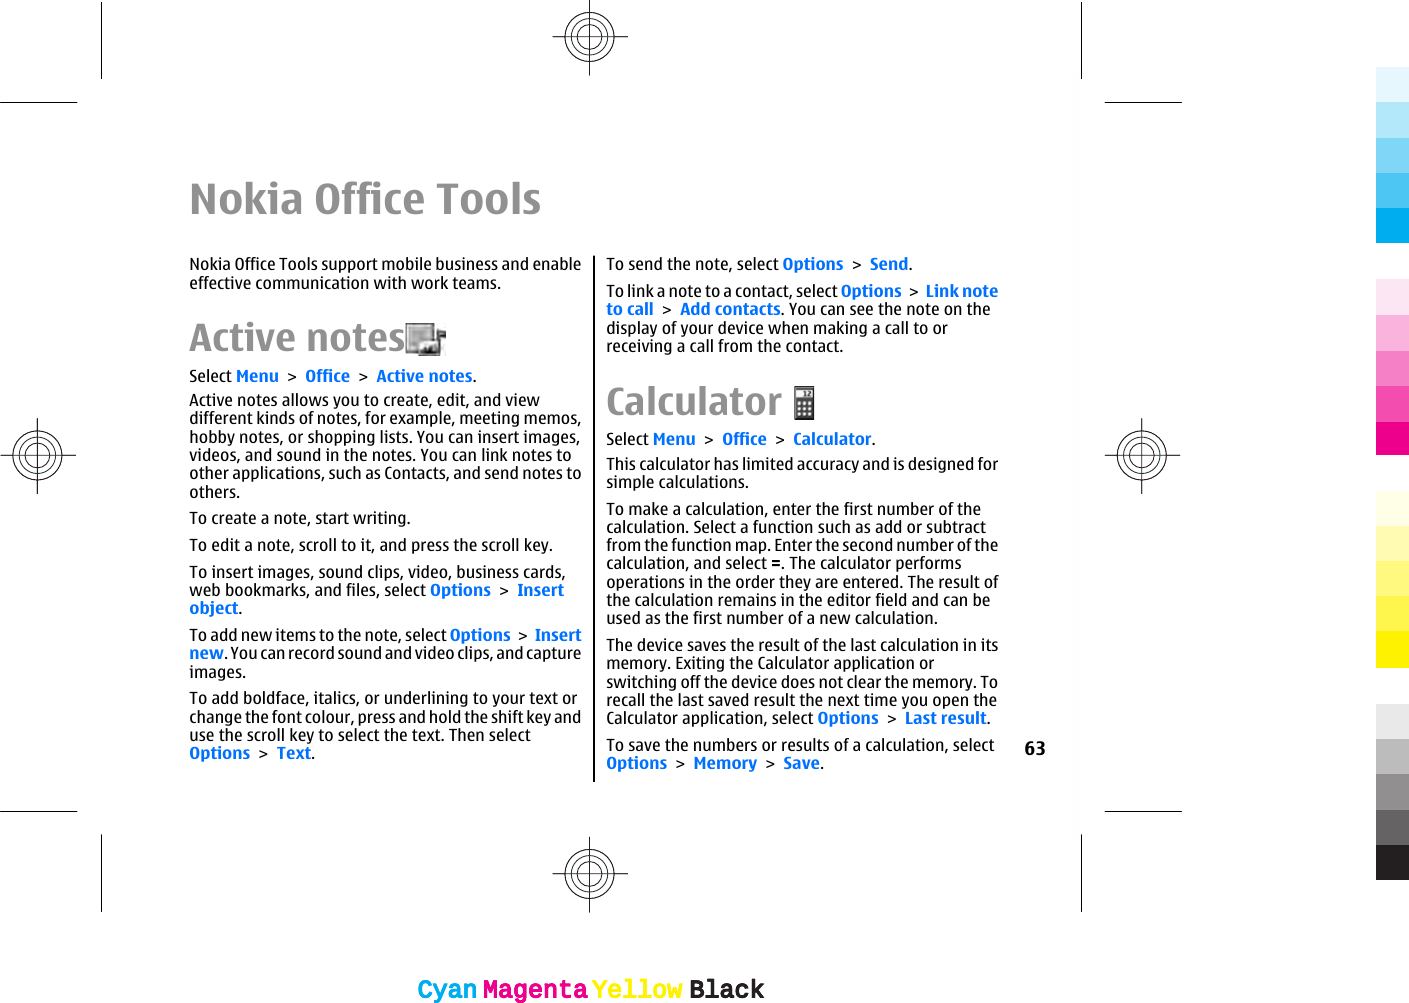 Nokia Office ToolsNokia Office Tools support mobile business and enableeffective communication with work teams.Active notes  Select Menu &gt; Office &gt; Active notes.Active notes allows you to create, edit, and viewdifferent kinds of notes, for example, meeting memos,hobby notes, or shopping lists. You can insert images,videos, and sound in the notes. You can link notes toother applications, such as Contacts, and send notes toothers.To create a note, start writing.To edit a note, scroll to it, and press the scroll key.To insert images, sound clips, video, business cards,web bookmarks, and files, select Options &gt; Insertobject.To add new items to the note, select Options &gt; Insertnew. You can record sound and video clips, and captureimages.To add boldface, italics, or underlining to your text orchange the font colour, press and hold the shift key anduse the scroll key to select the text. Then selectOptions &gt; Text.To send the note, select Options &gt; Send.To link a note to a contact, select Options &gt; Link noteto call &gt; Add contacts. You can see the note on thedisplay of your device when making a call to orreceiving a call from the contact.CalculatorSelect Menu &gt; Office &gt; Calculator.This calculator has limited accuracy and is designed forsimple calculations.To make a calculation, enter the first number of thecalculation. Select a function such as add or subtractfrom the function map. Enter the second number of thecalculation, and select =. The calculator performsoperations in the order they are entered. The result ofthe calculation remains in the editor field and can beused as the first number of a new calculation.The device saves the result of the last calculation in itsmemory. Exiting the Calculator application orswitching off the device does not clear the memory. Torecall the last saved result the next time you open theCalculator application, select Options &gt; Last result.To save the numbers or results of a calculation, selectOptions &gt; Memory &gt; Save.63CyanCyanMagentaMagentaYellowYellowBlackBlackCyanCyanMagentaMagentaYellowYellowBlackBlack